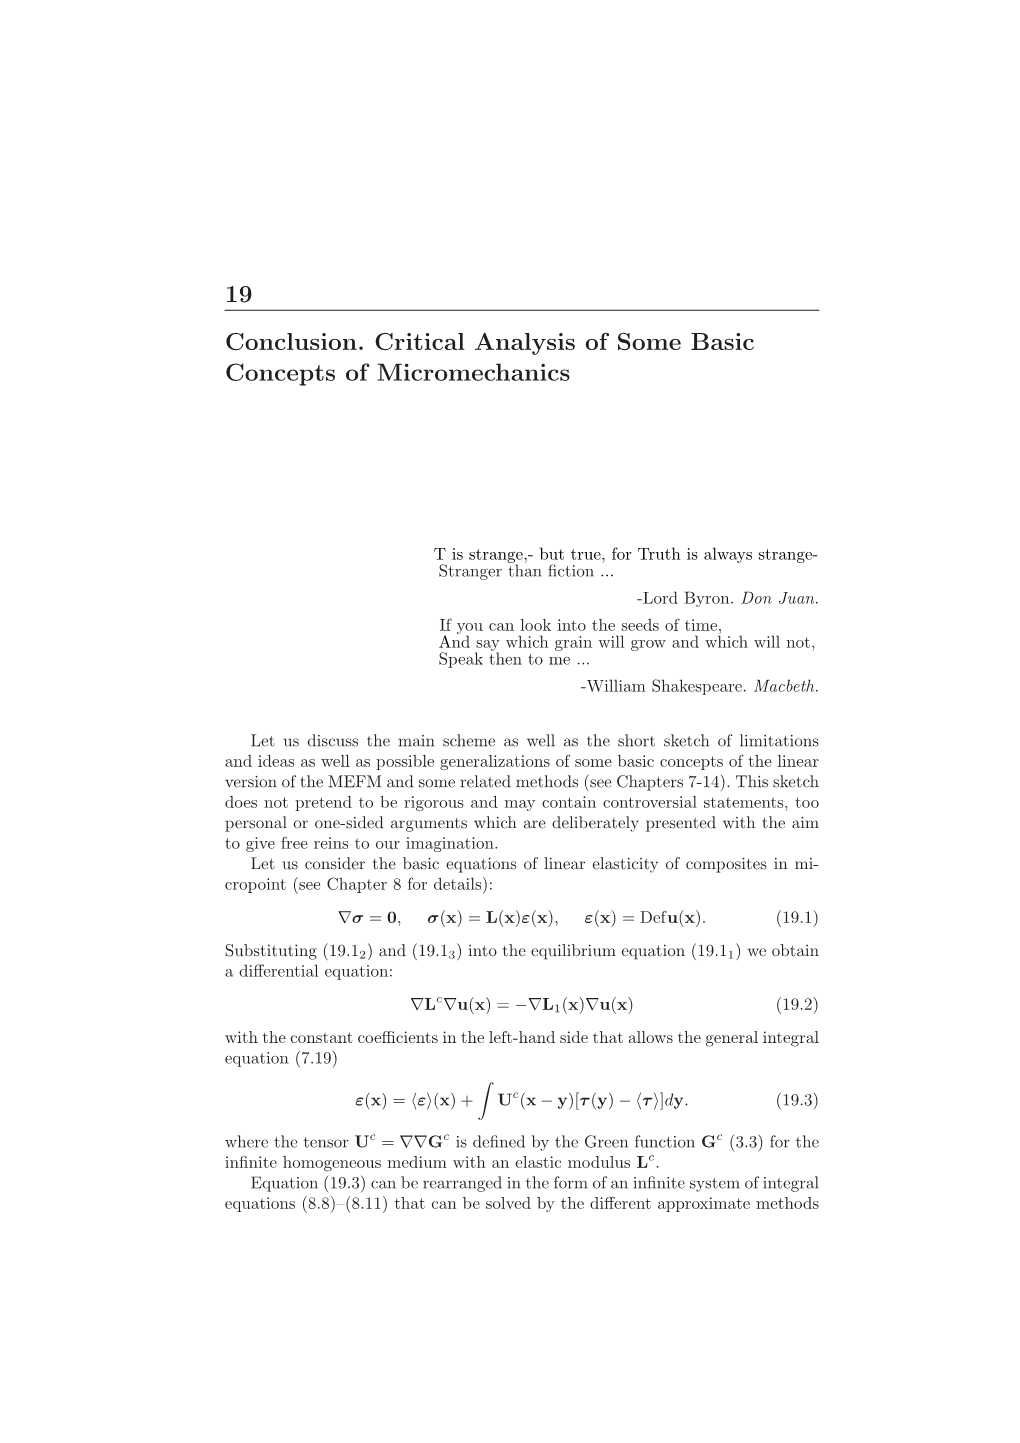 19 Conclusion. Critical Analysis of Some Basic Concepts of Micromechanics